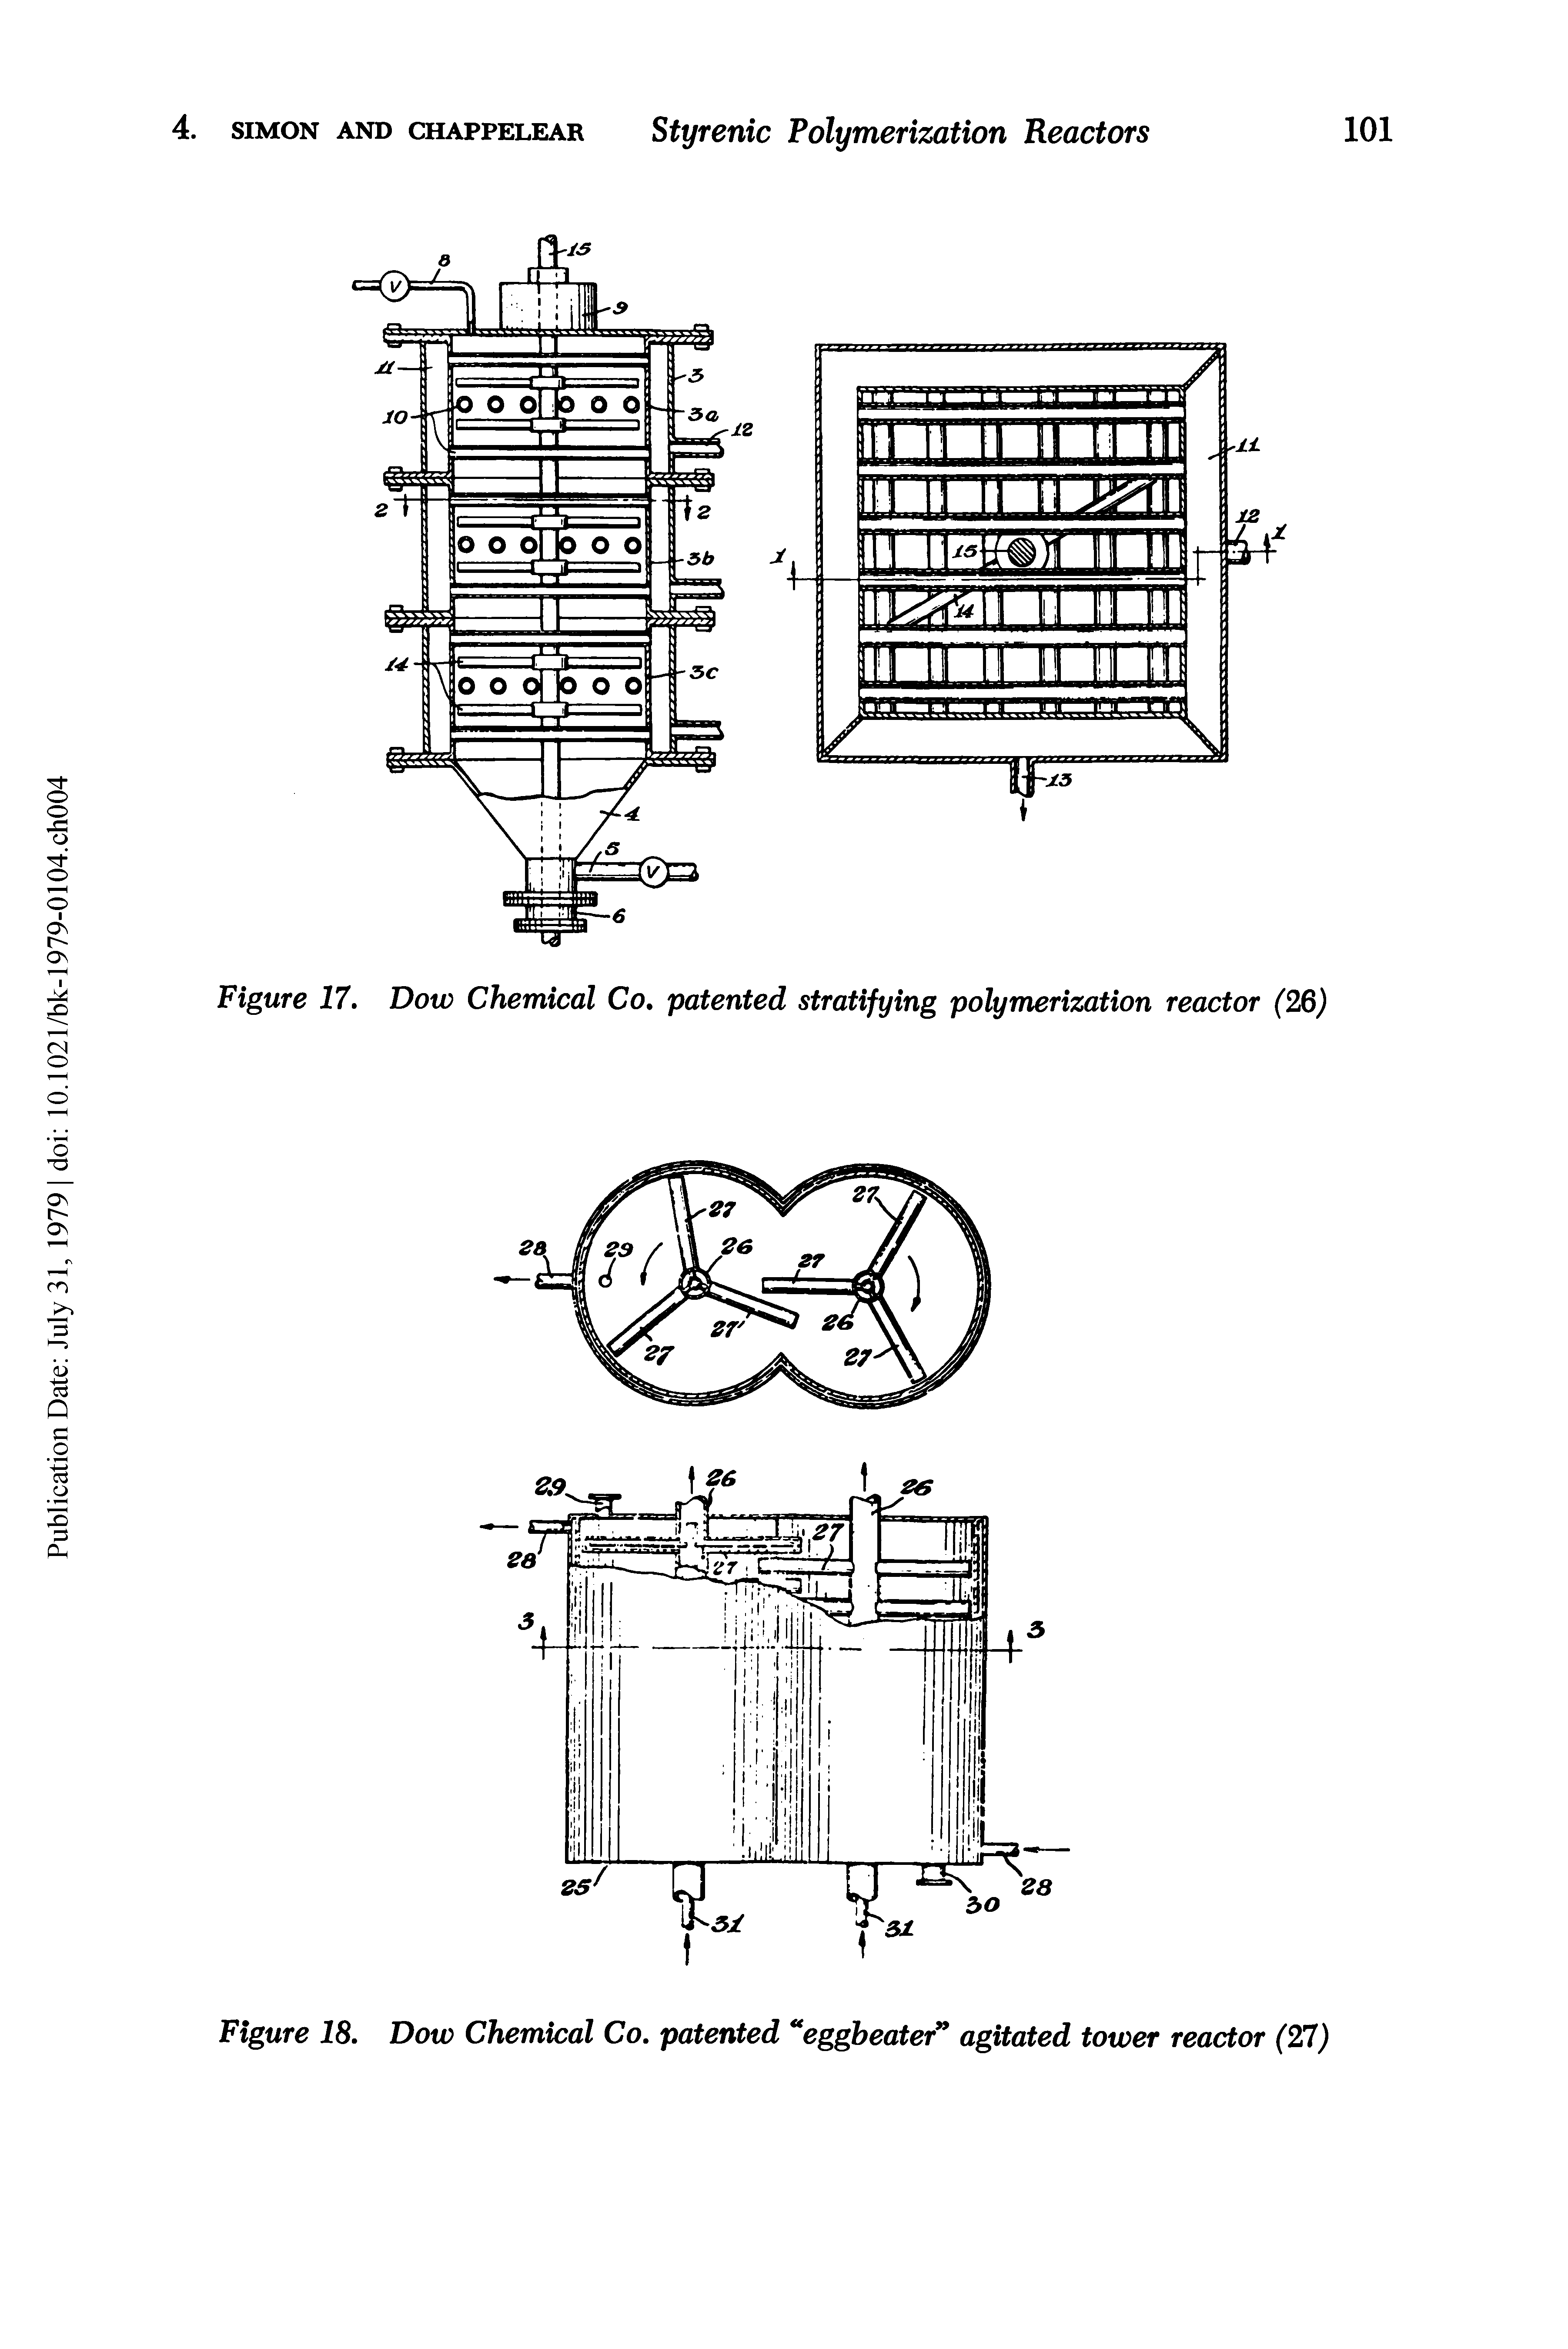 Figure 18, Dow Chemical Co, patented eggbeater " agitated tower reactor (27)...